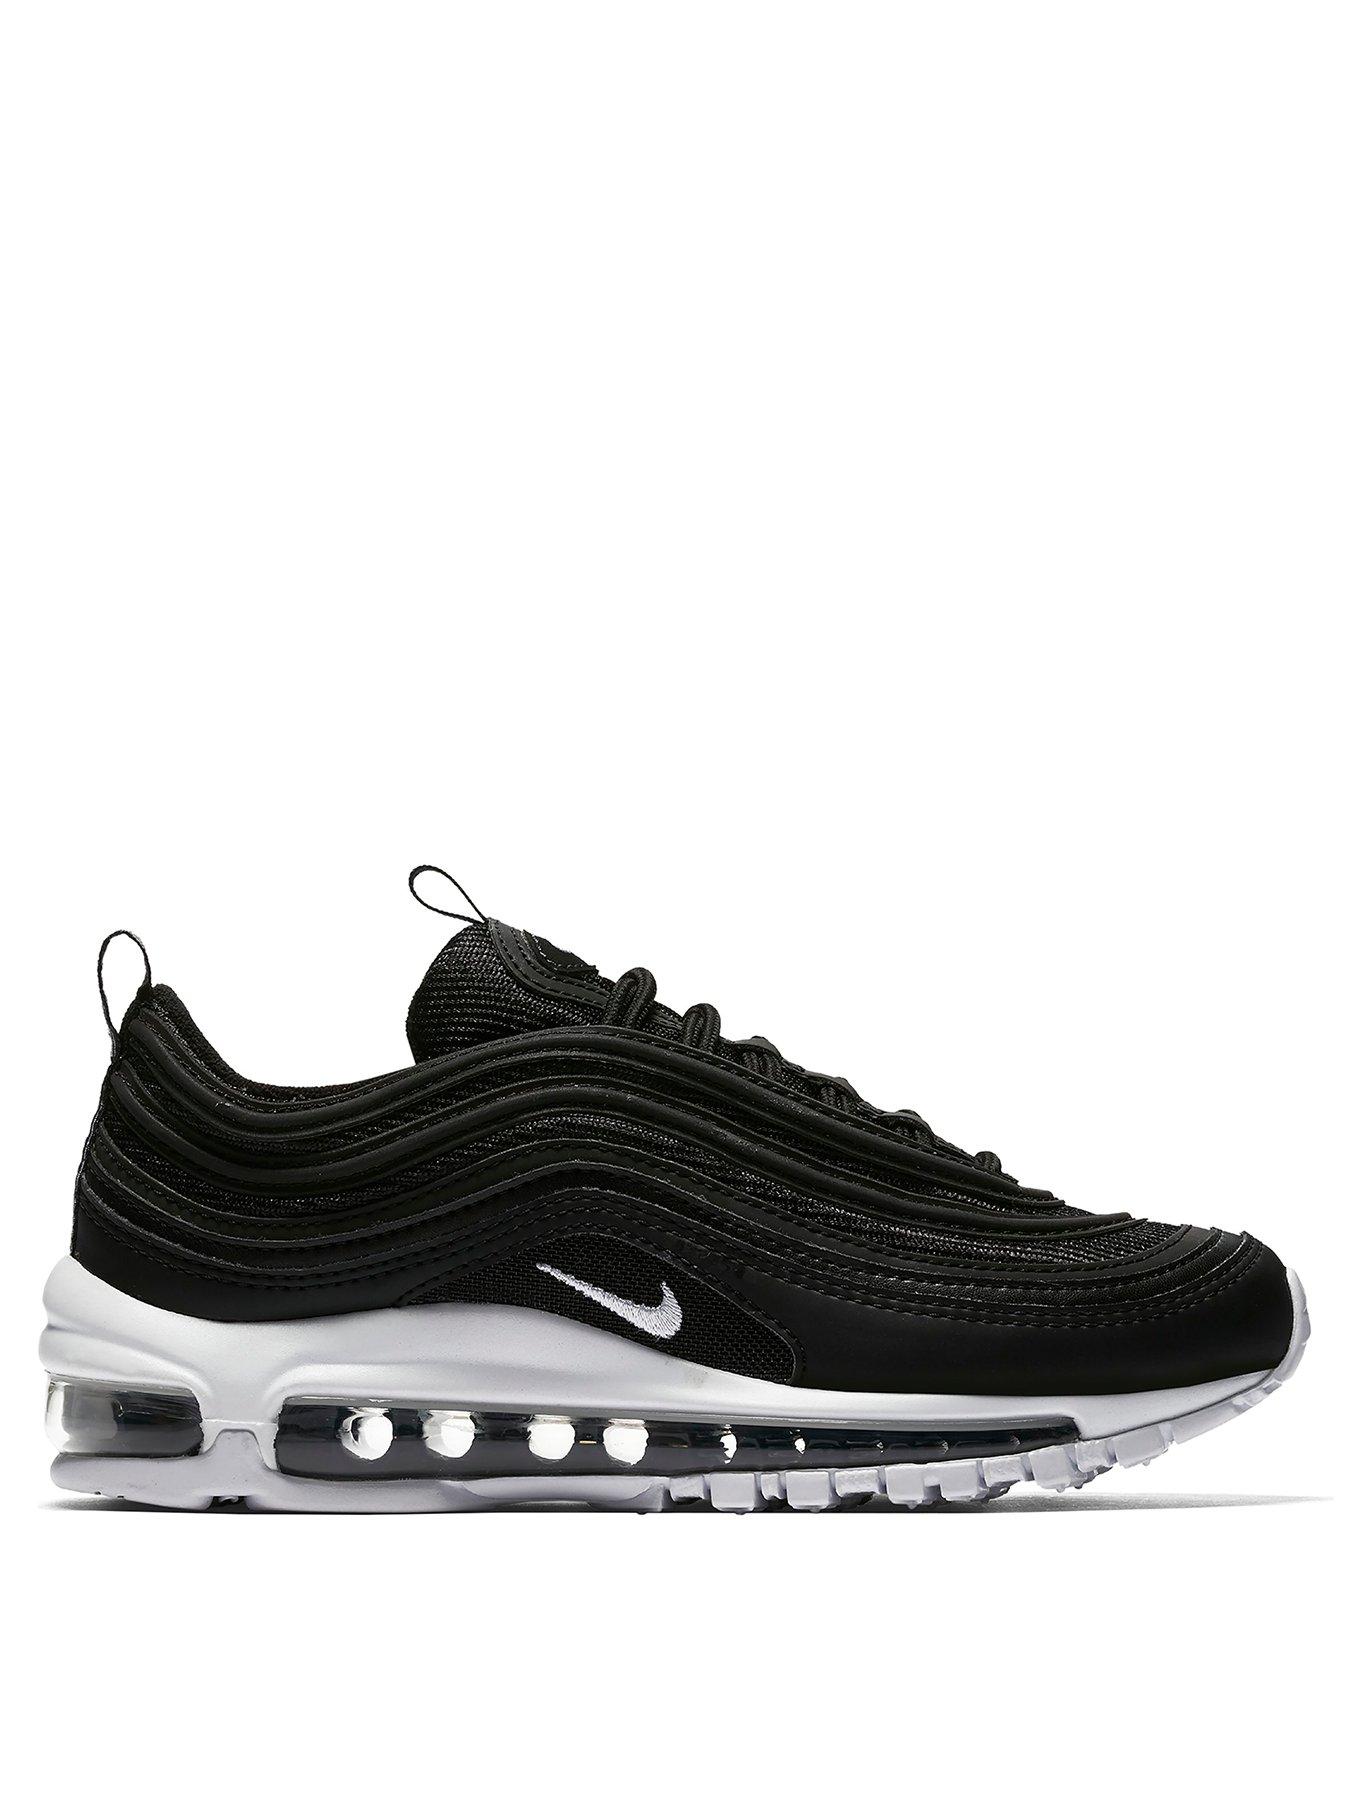 air max 97s black and white